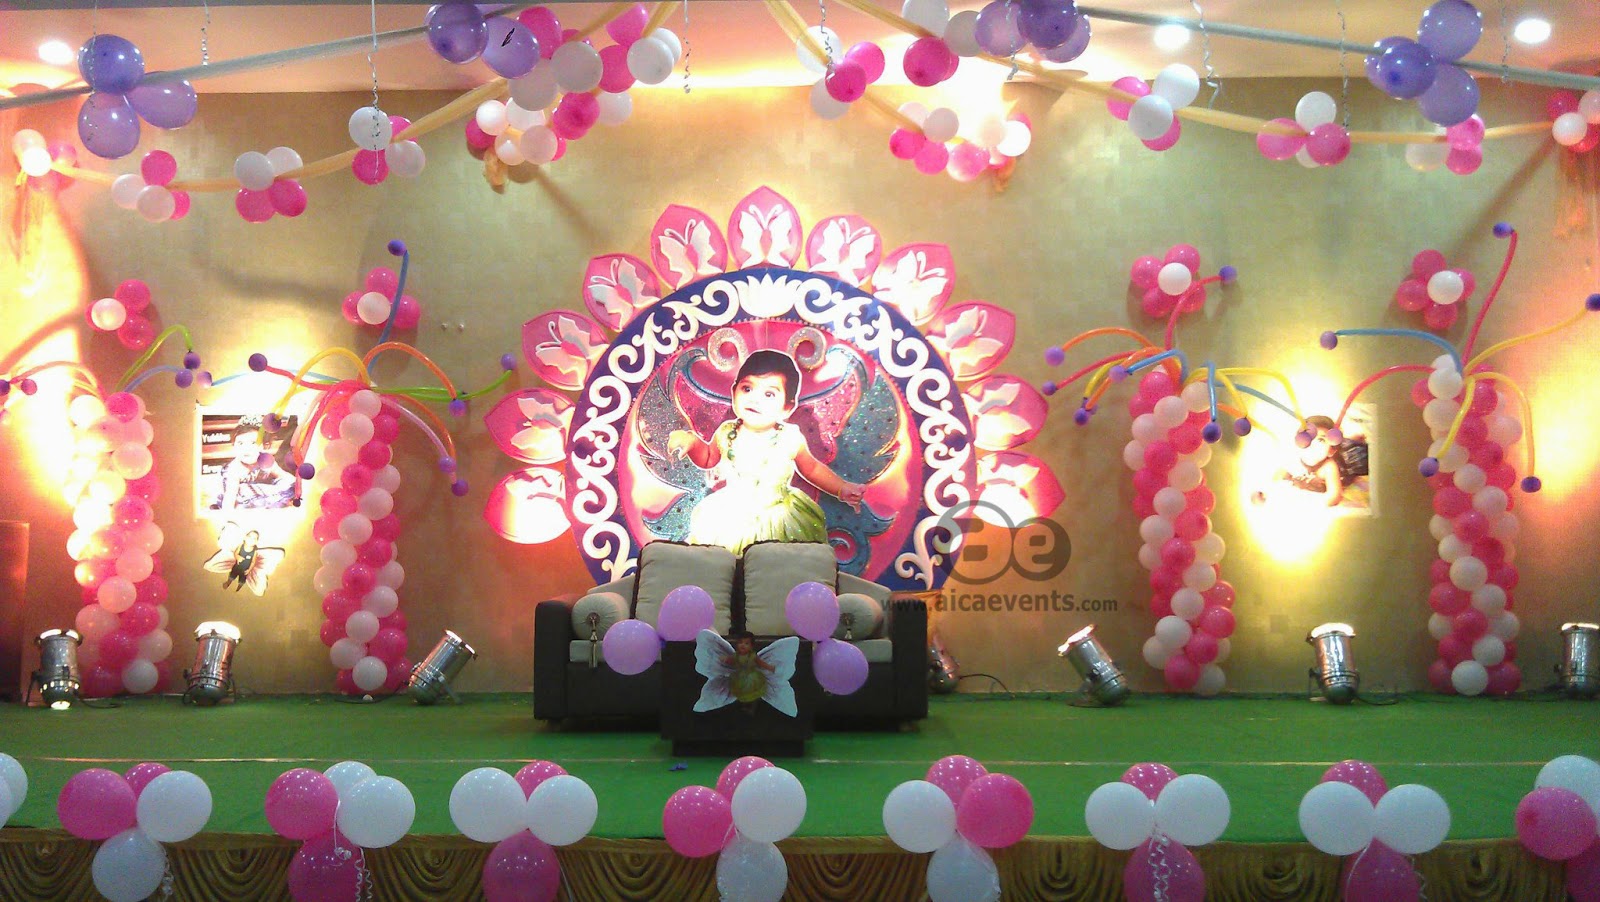 Aicaevents India  Butterfly Theme Birthday  party  decorations 